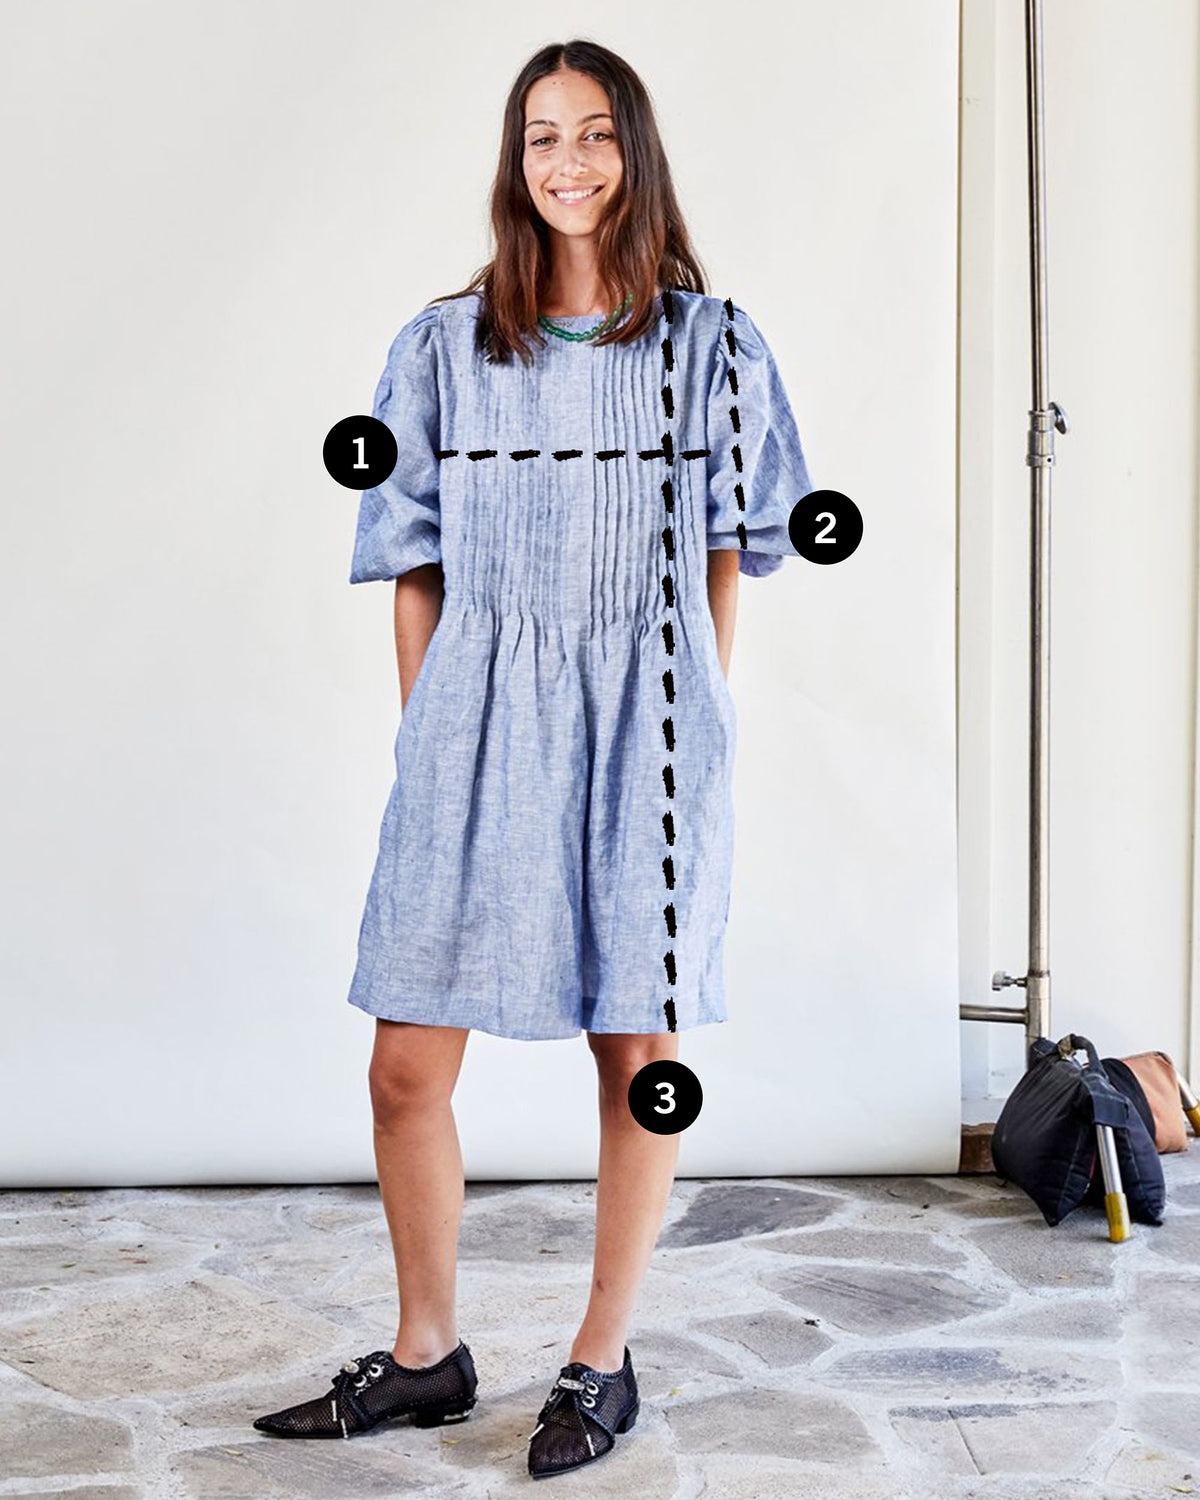 Frannie in a dress with detailed and numbered lines showing how to measure 